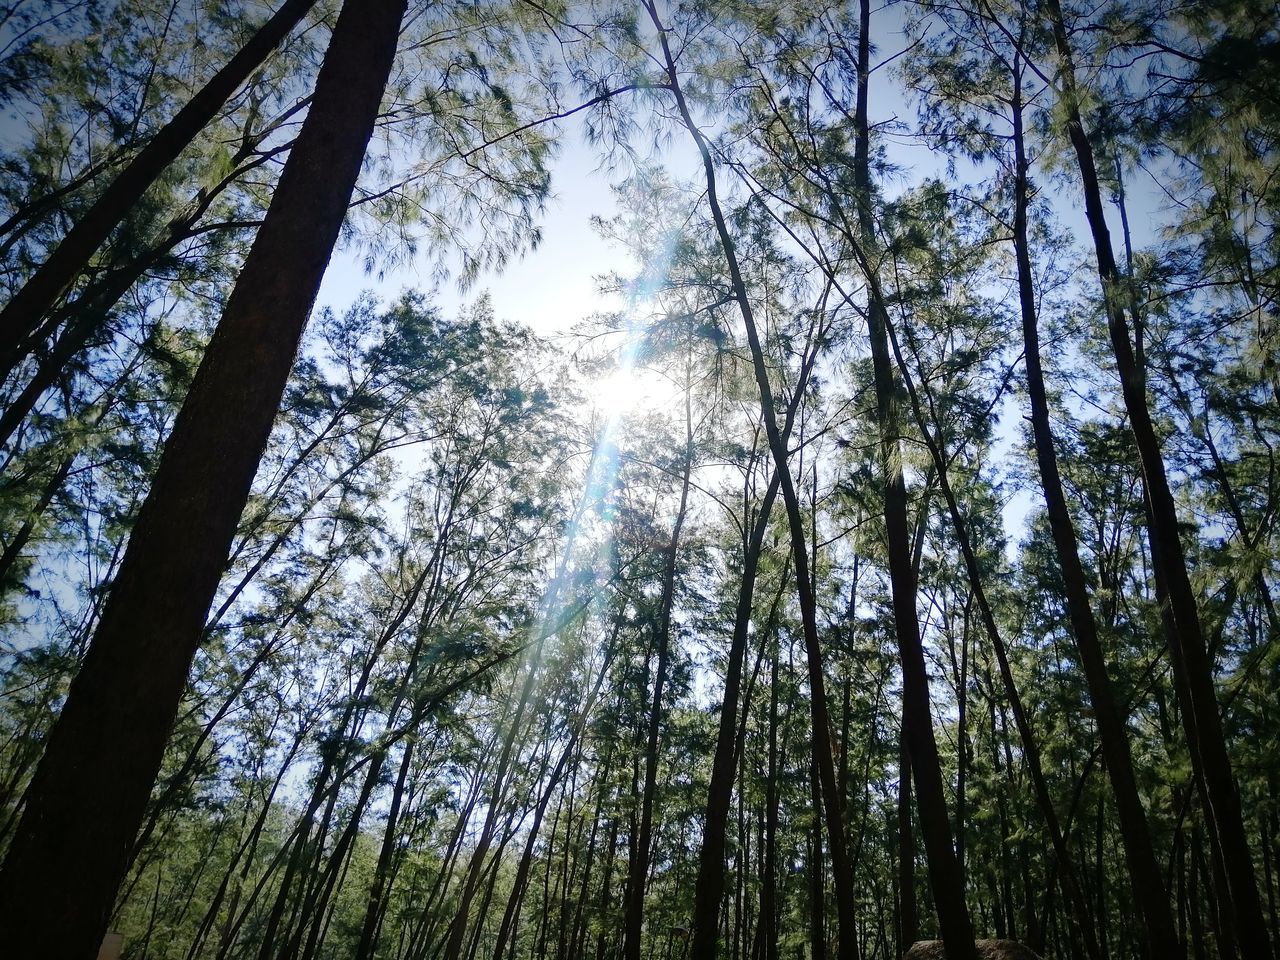 LOW ANGLE VIEW OF SUNLIGHT STREAMING THROUGH TREES